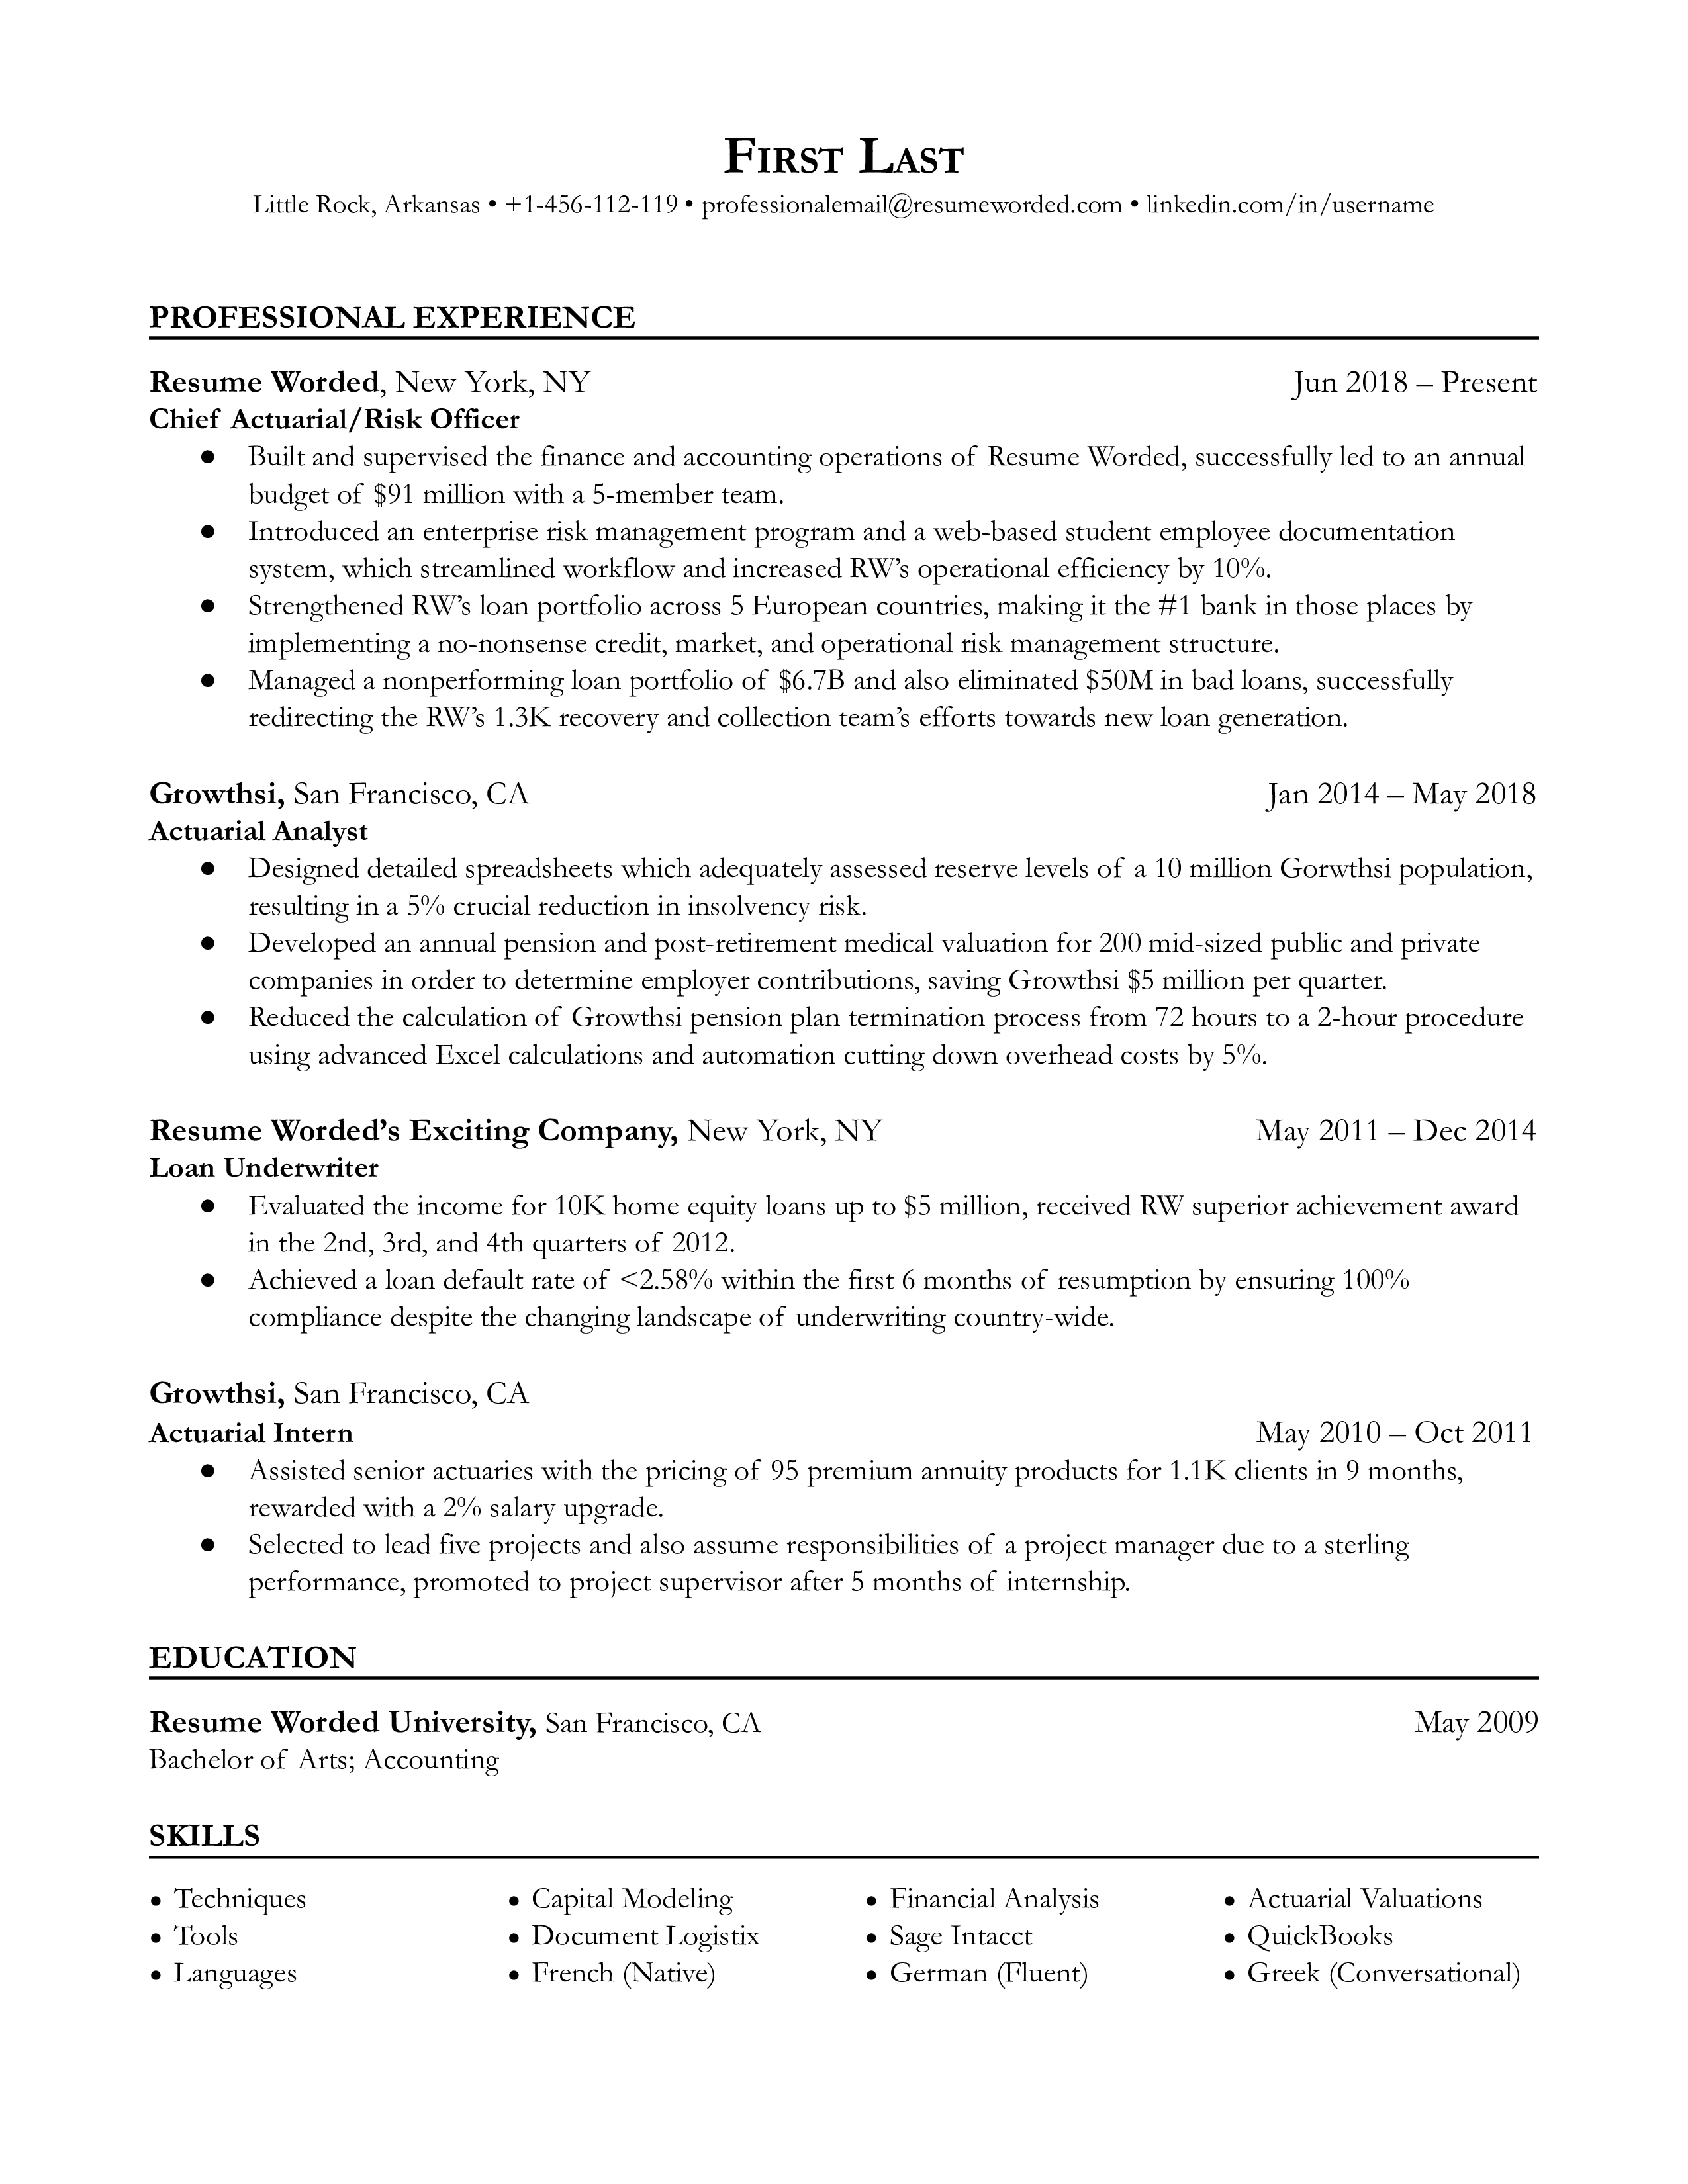 Chief Actuarial/Risk Officer Resume Template + Example